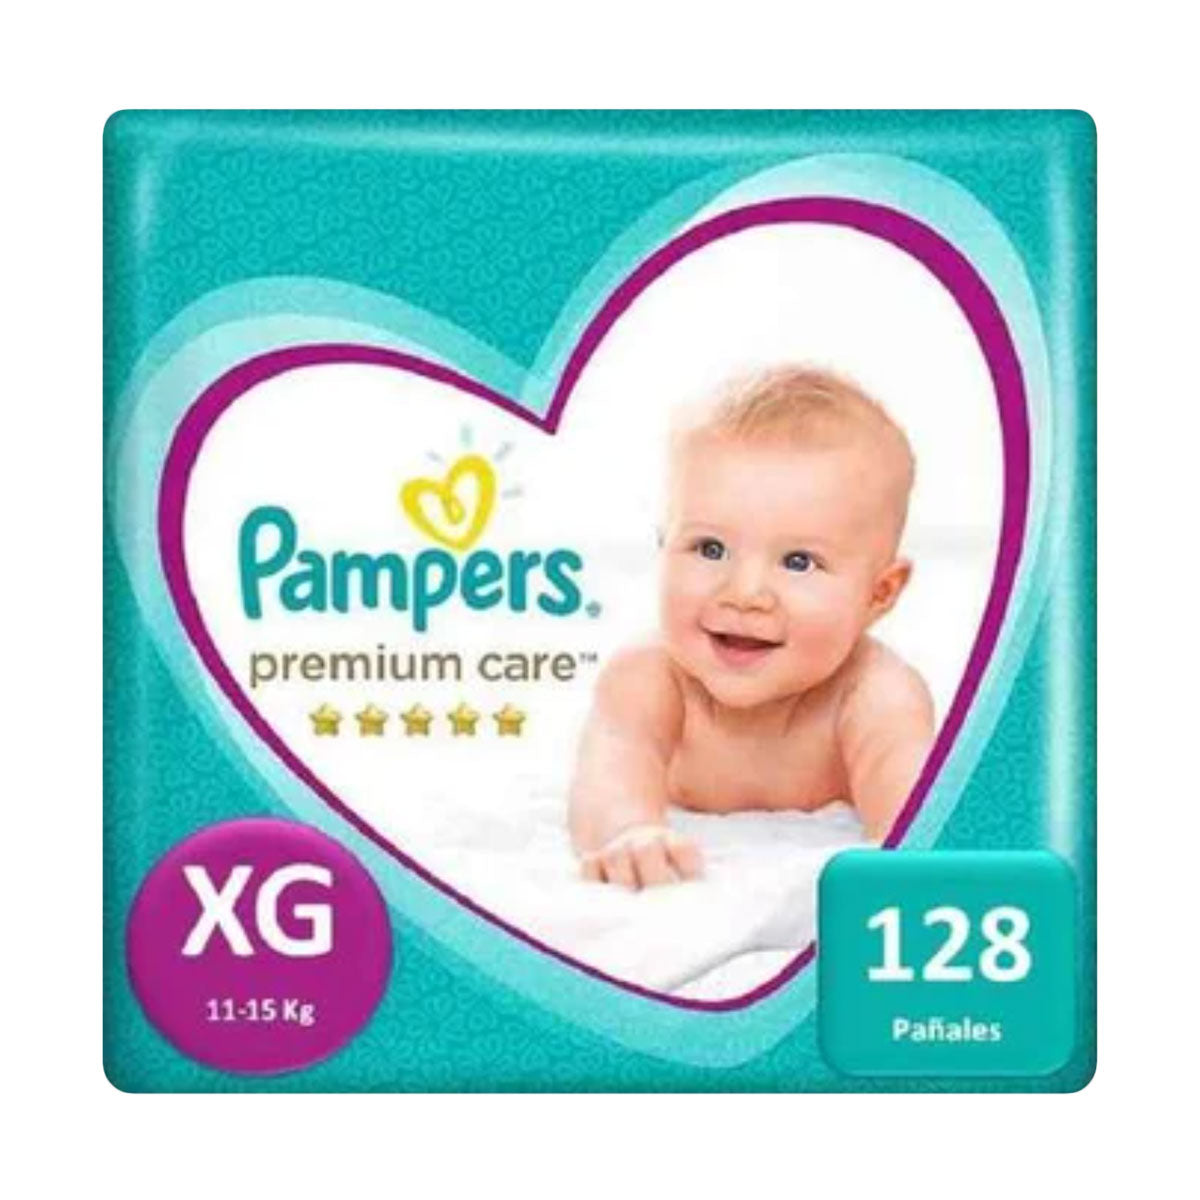 Pañales Pampers Premium Care XG (128 unidades)